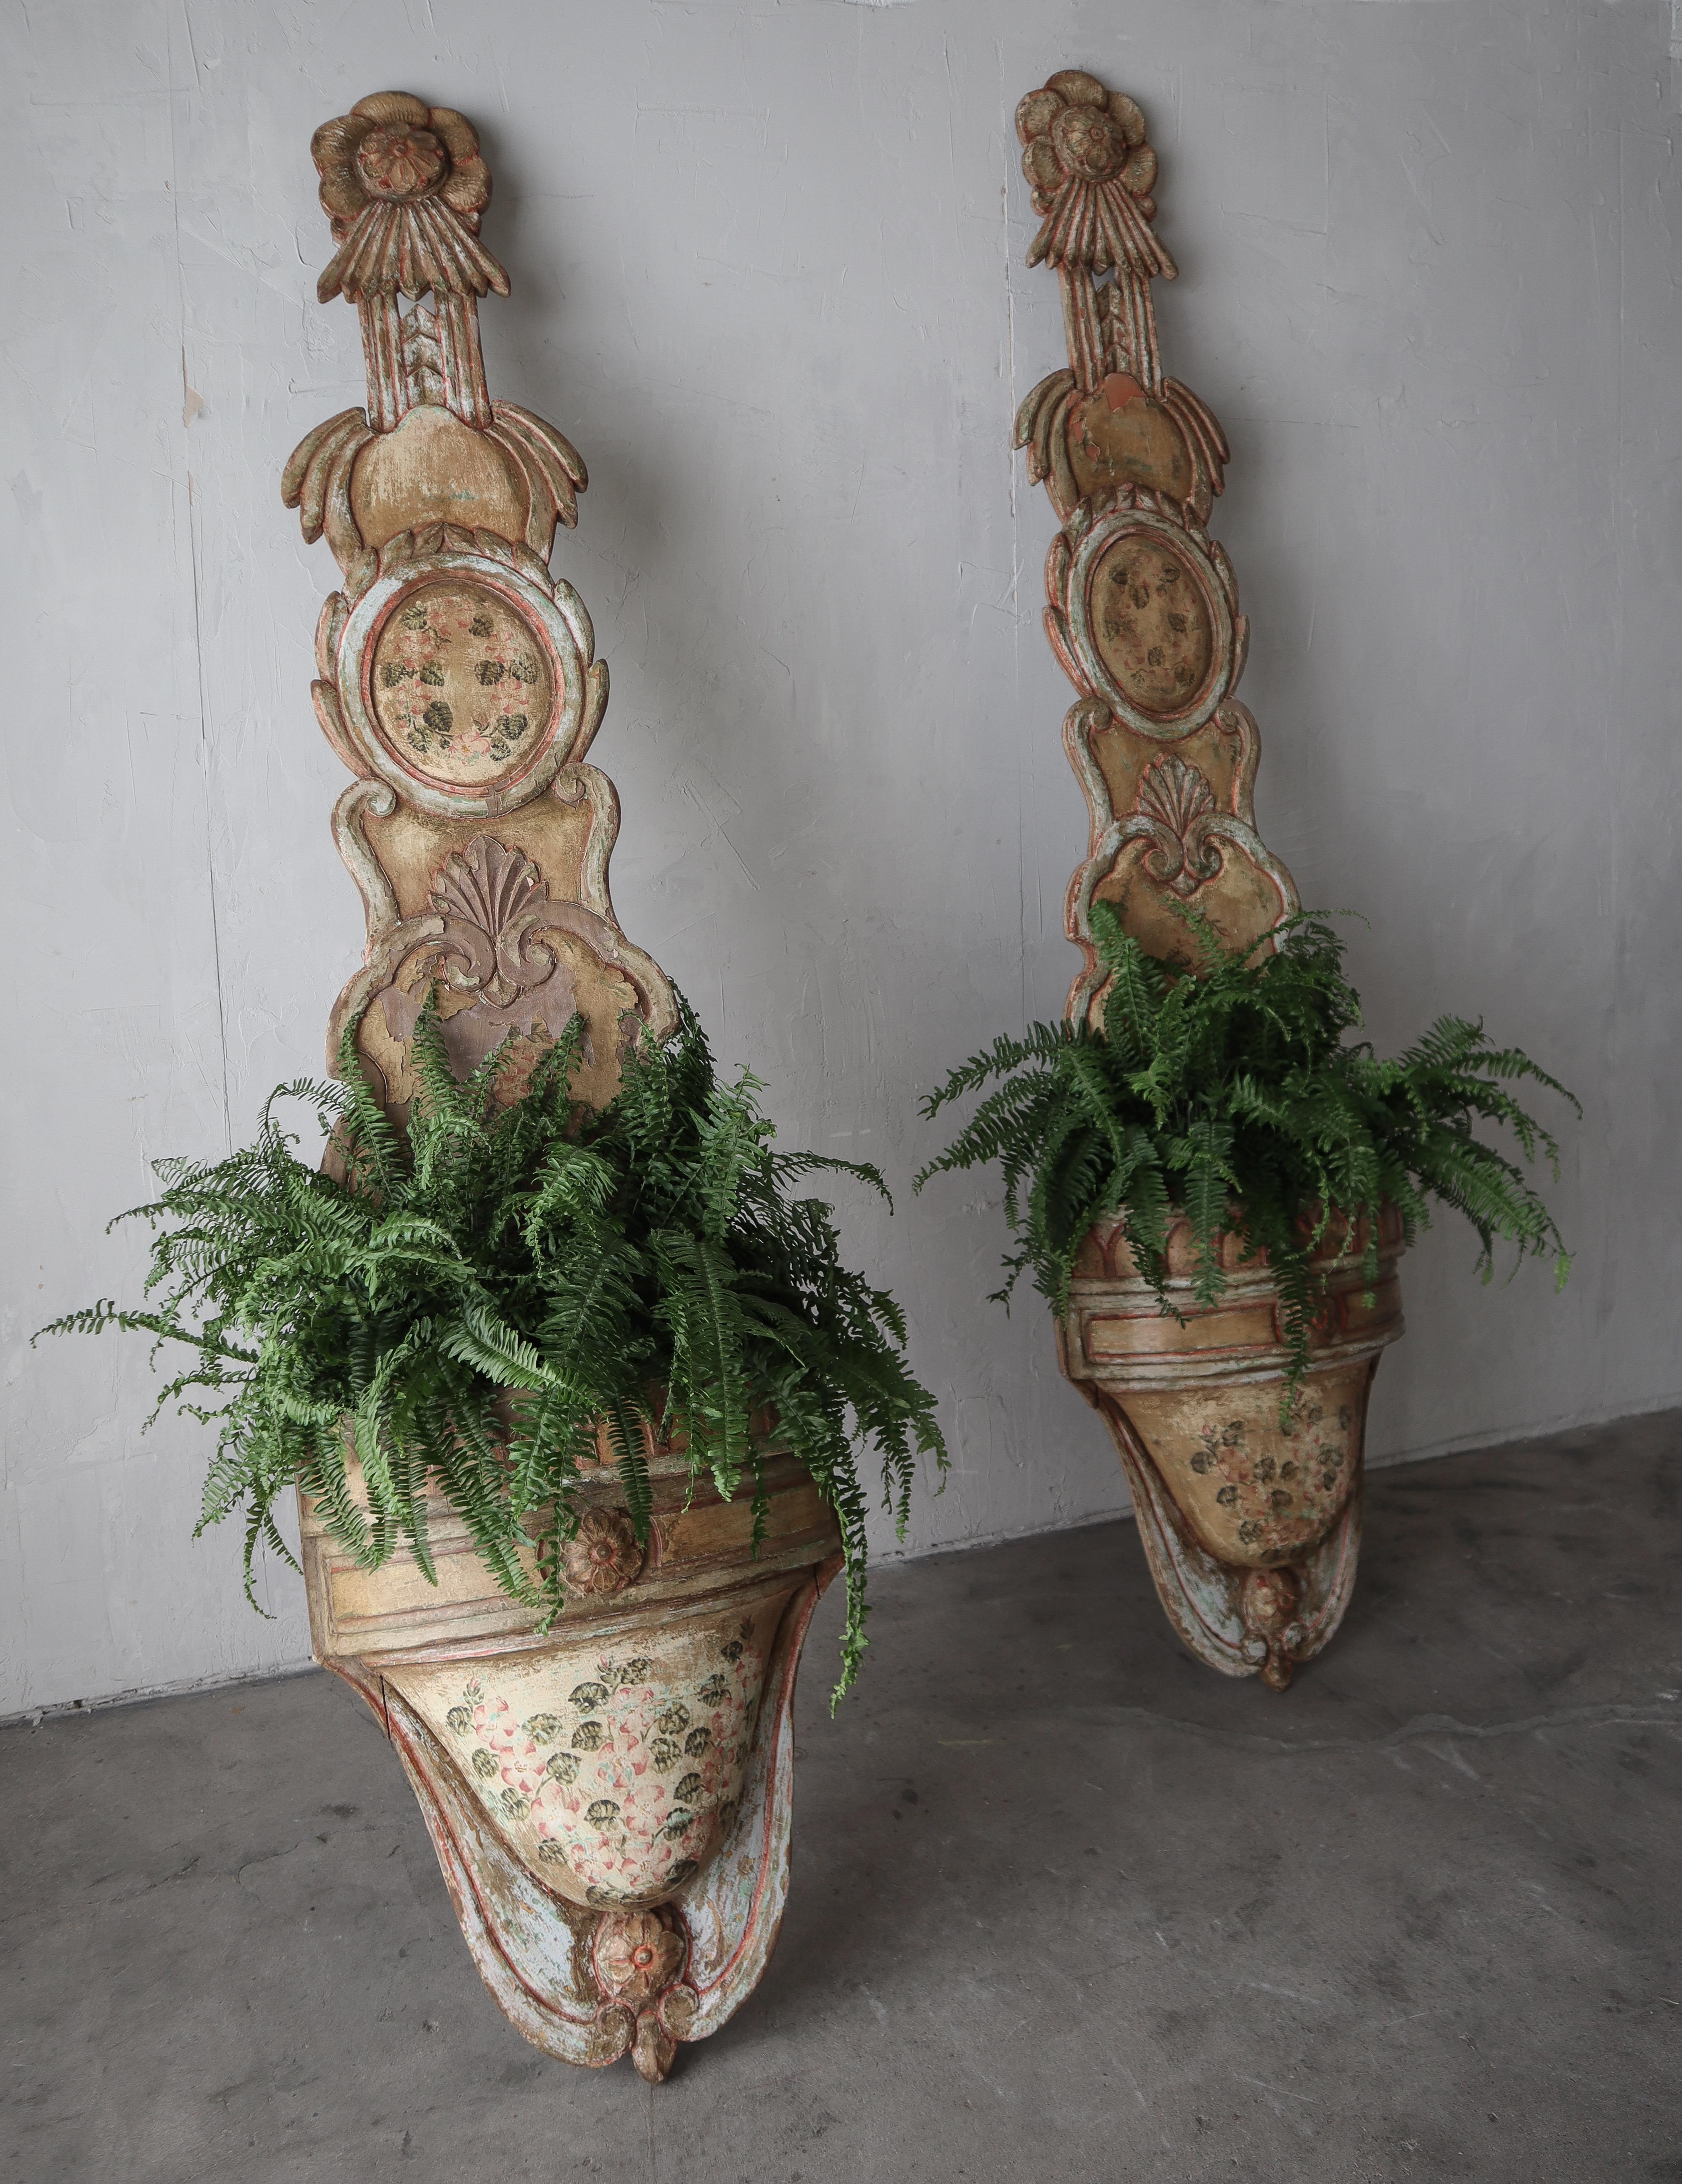 8ft Tall Pair of Antique European Wood Jardiniere Planters For Sale 4